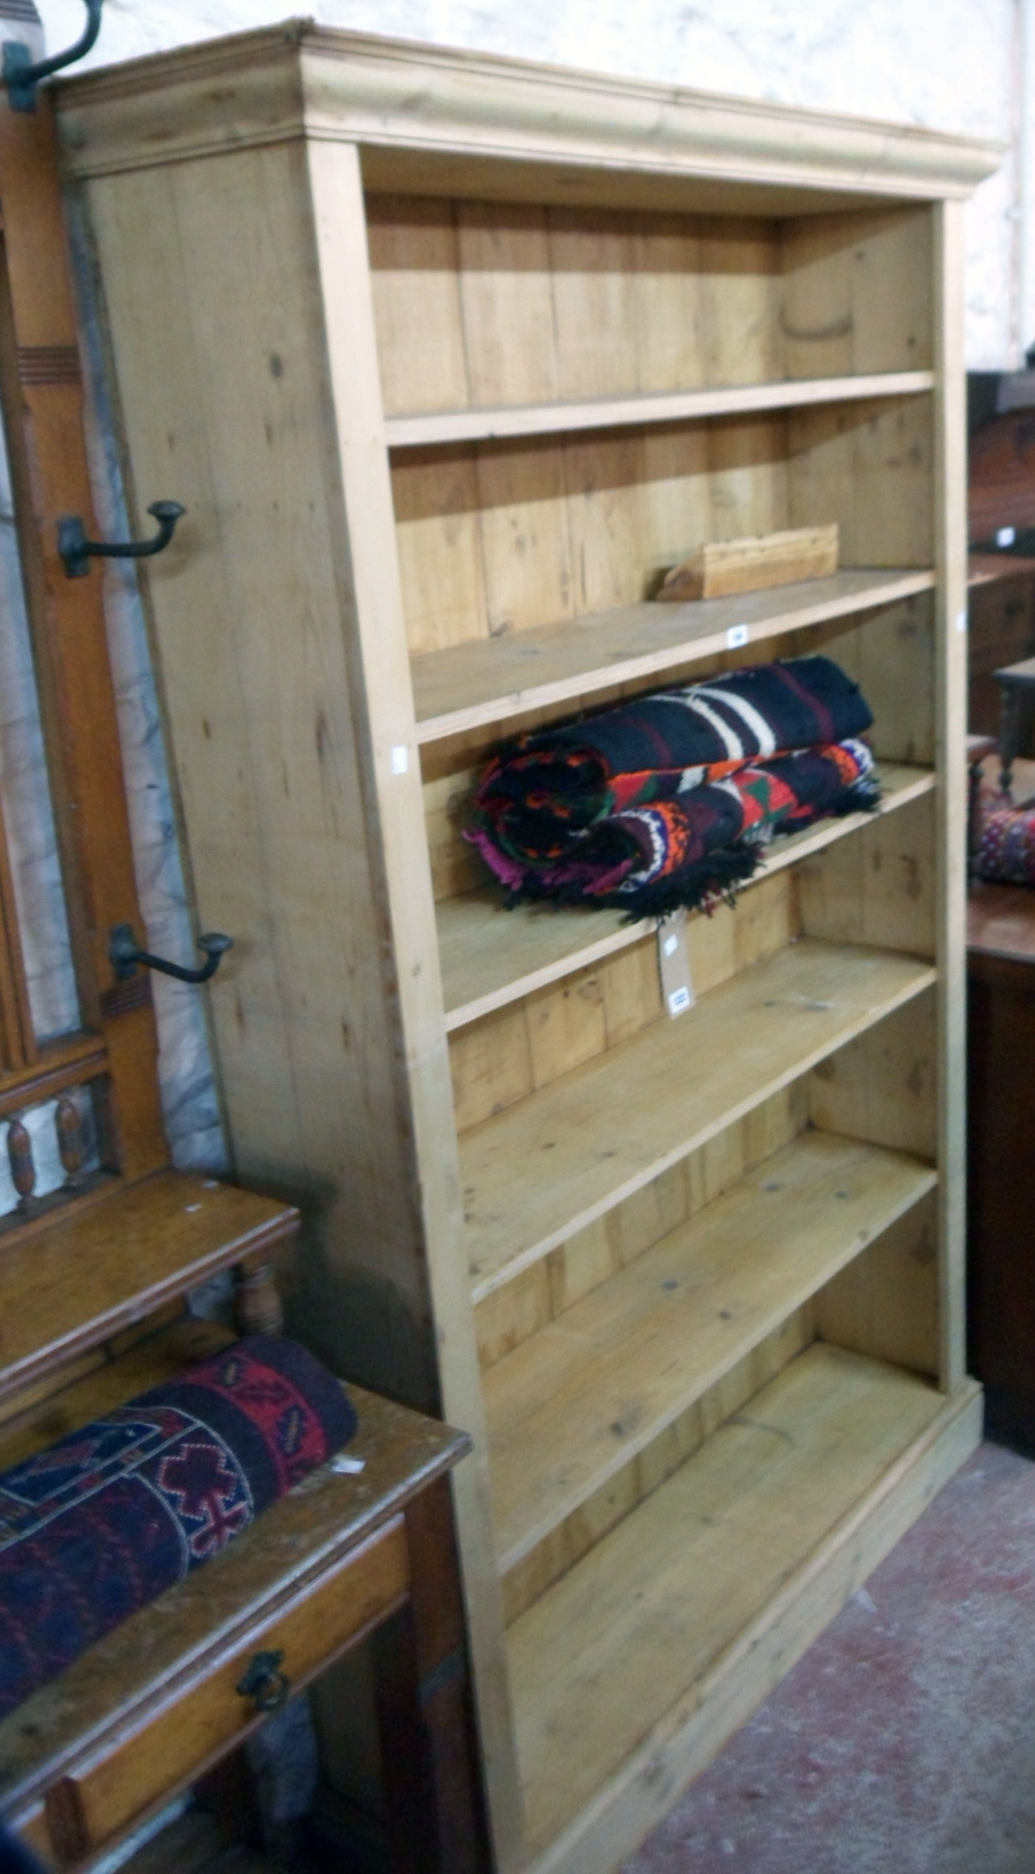 A 4' 3" stripped pine six shelf open bookcase with moulded cornice and plinth base - 6' 9" high